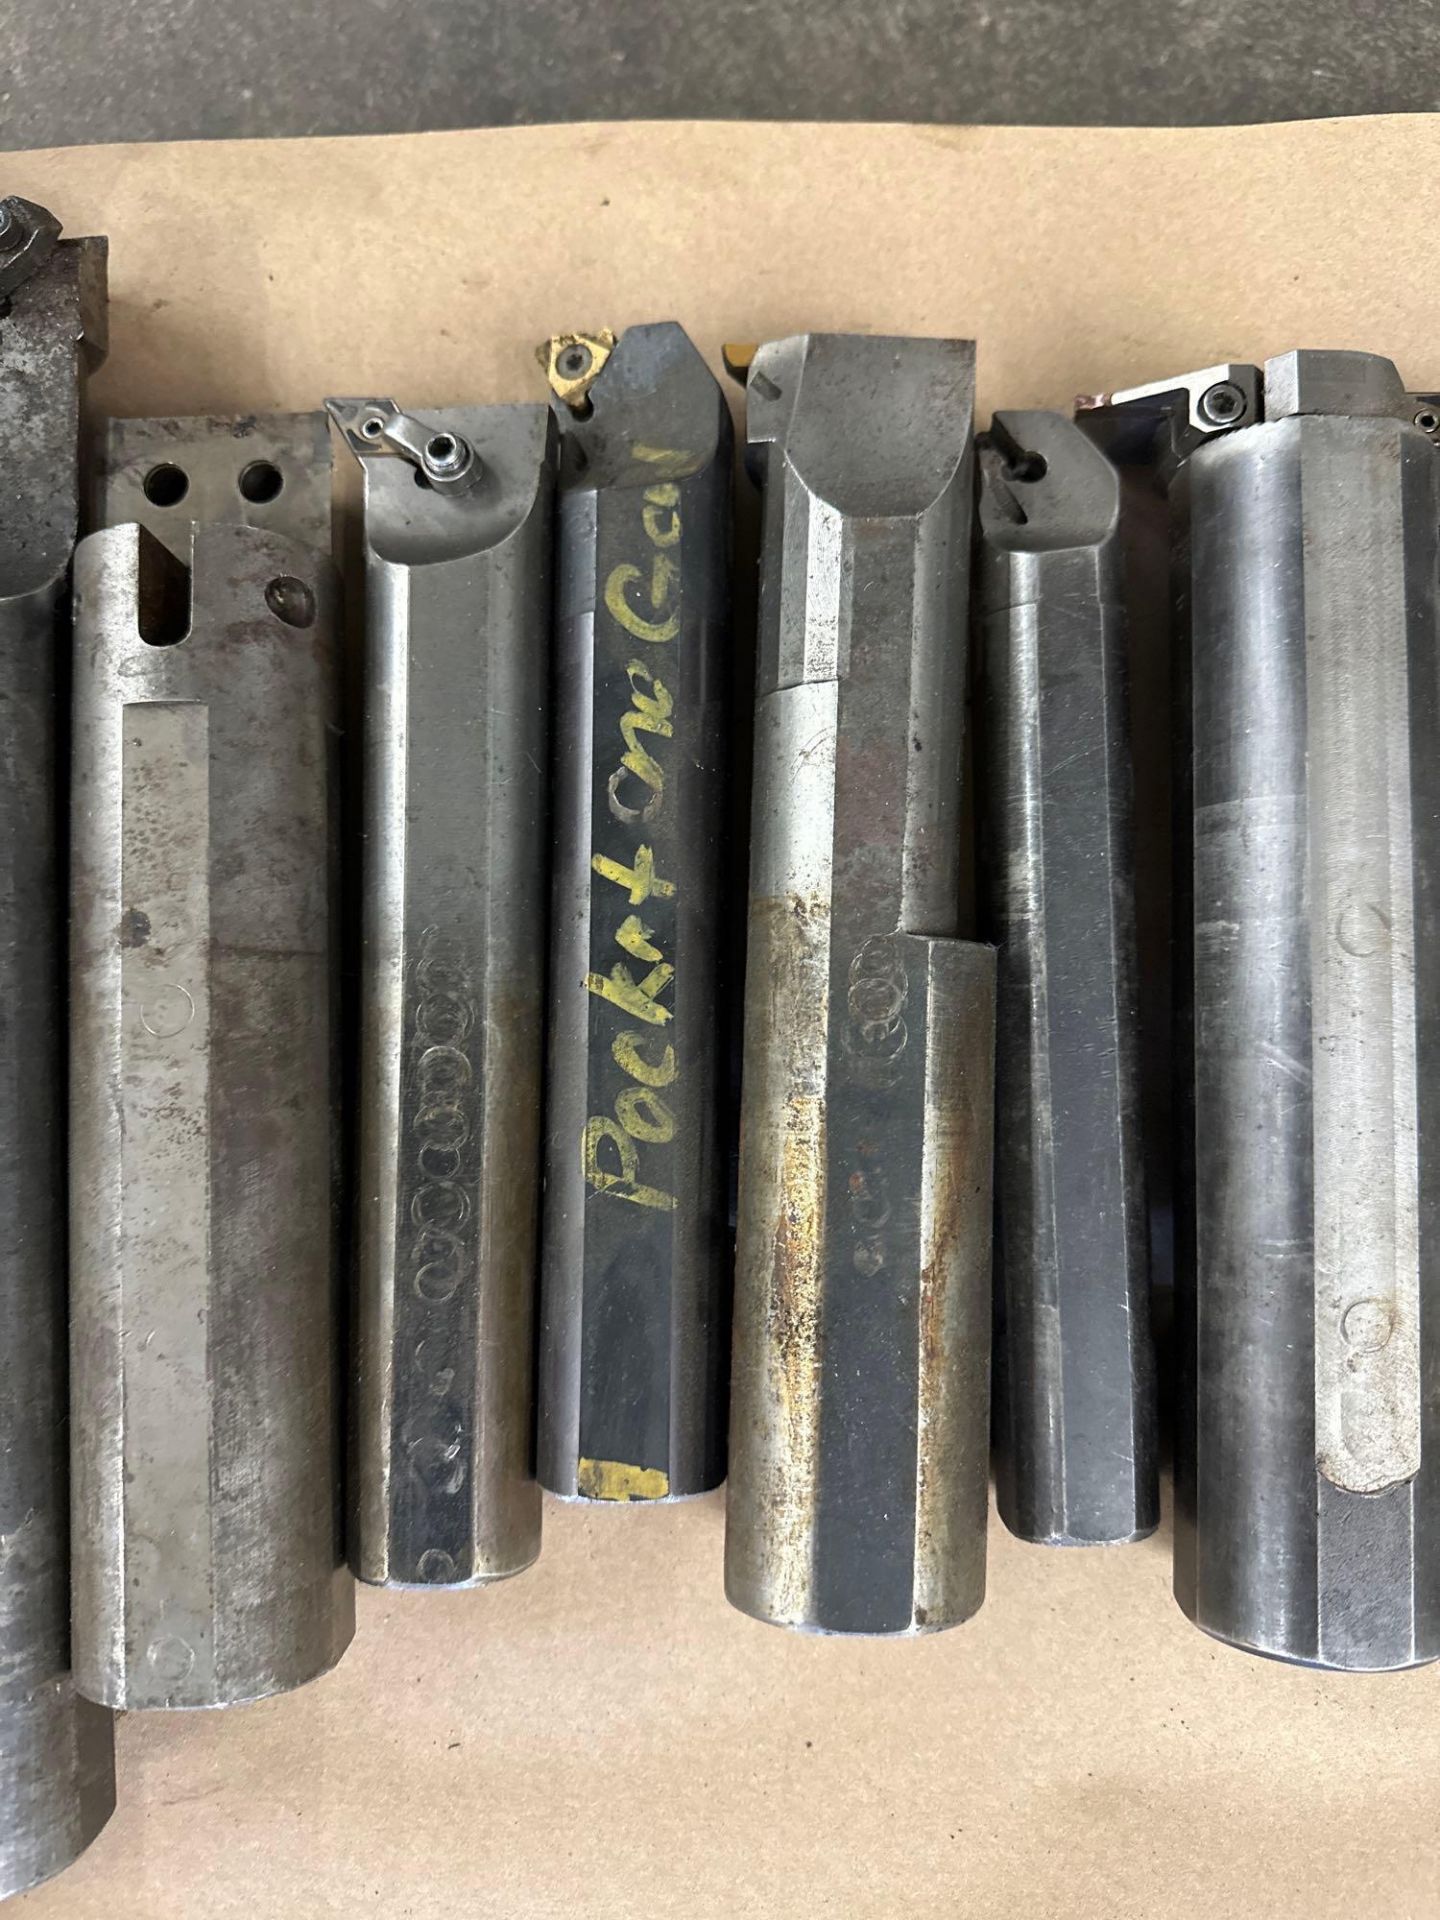 Lot of 10 Assorted Indexable Boring Bars Ranging From: 1 1/4” X 9 1/8” to 2 3/8” X 16” - Image 3 of 7